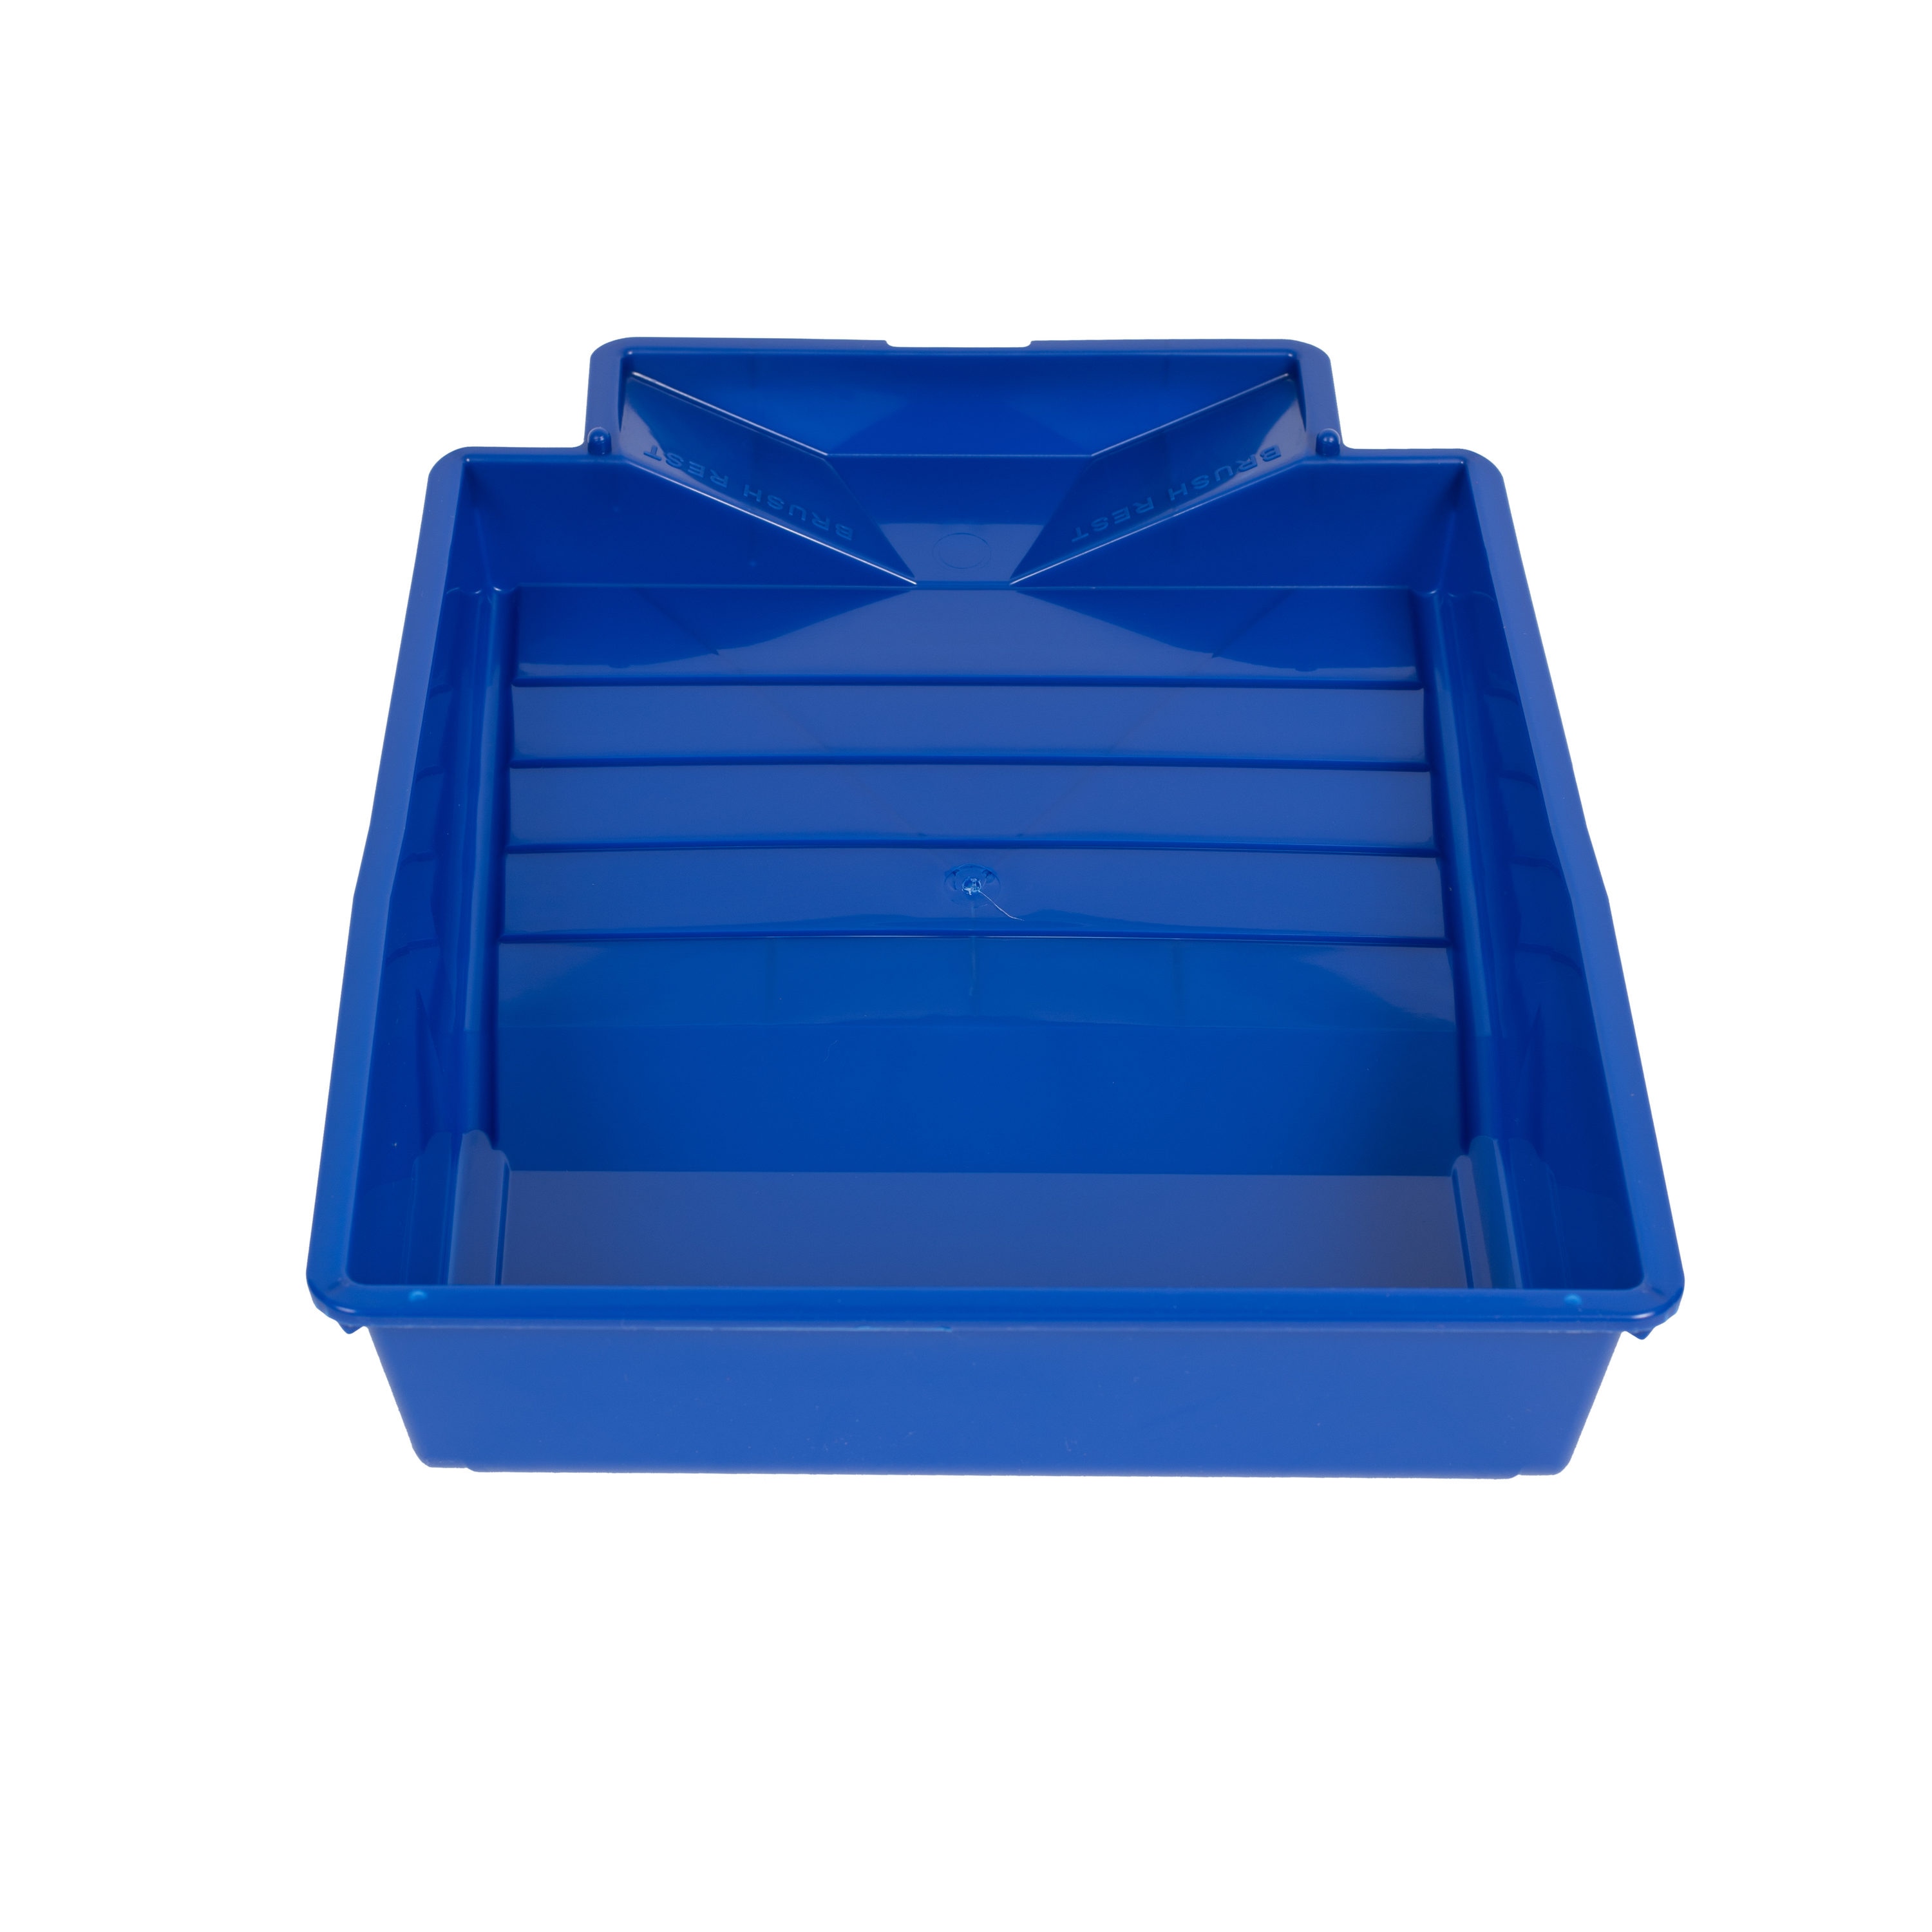 Qty (6) Purdy Nest 1.5 Gal Paint Tray 18x26 Durable Plastic Pour